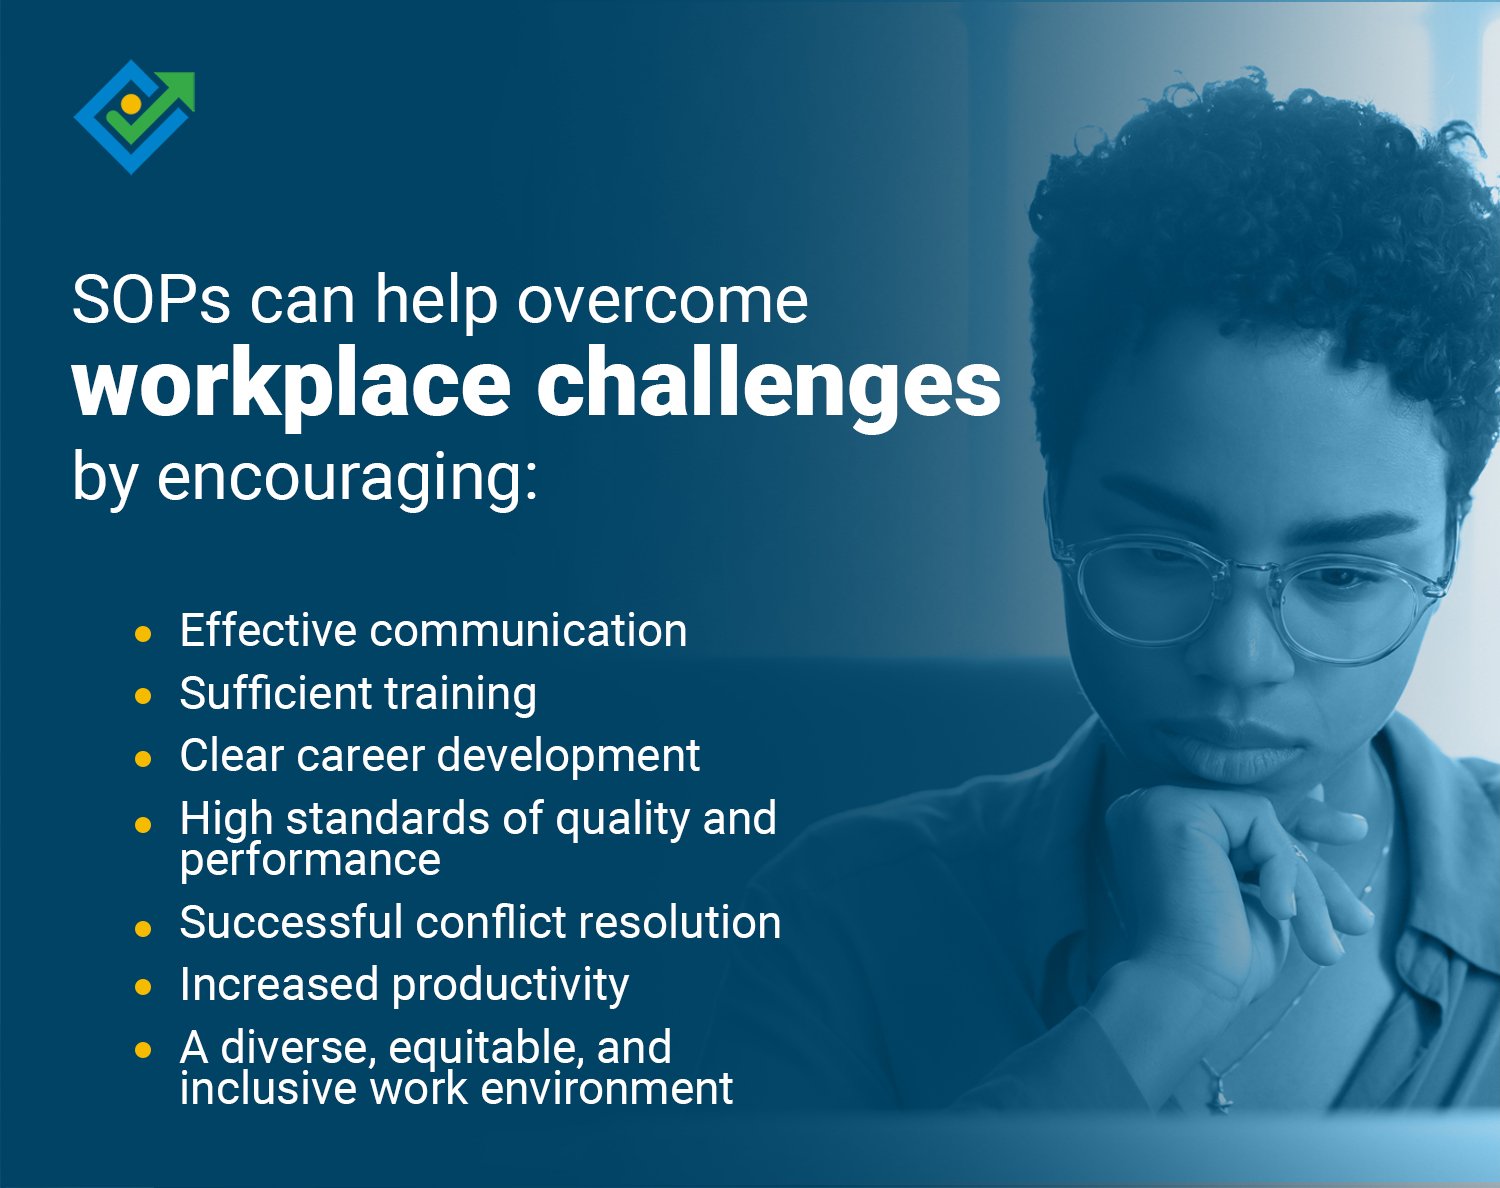 Standard Operating Procedures can help organizations overcome workplace challenges.